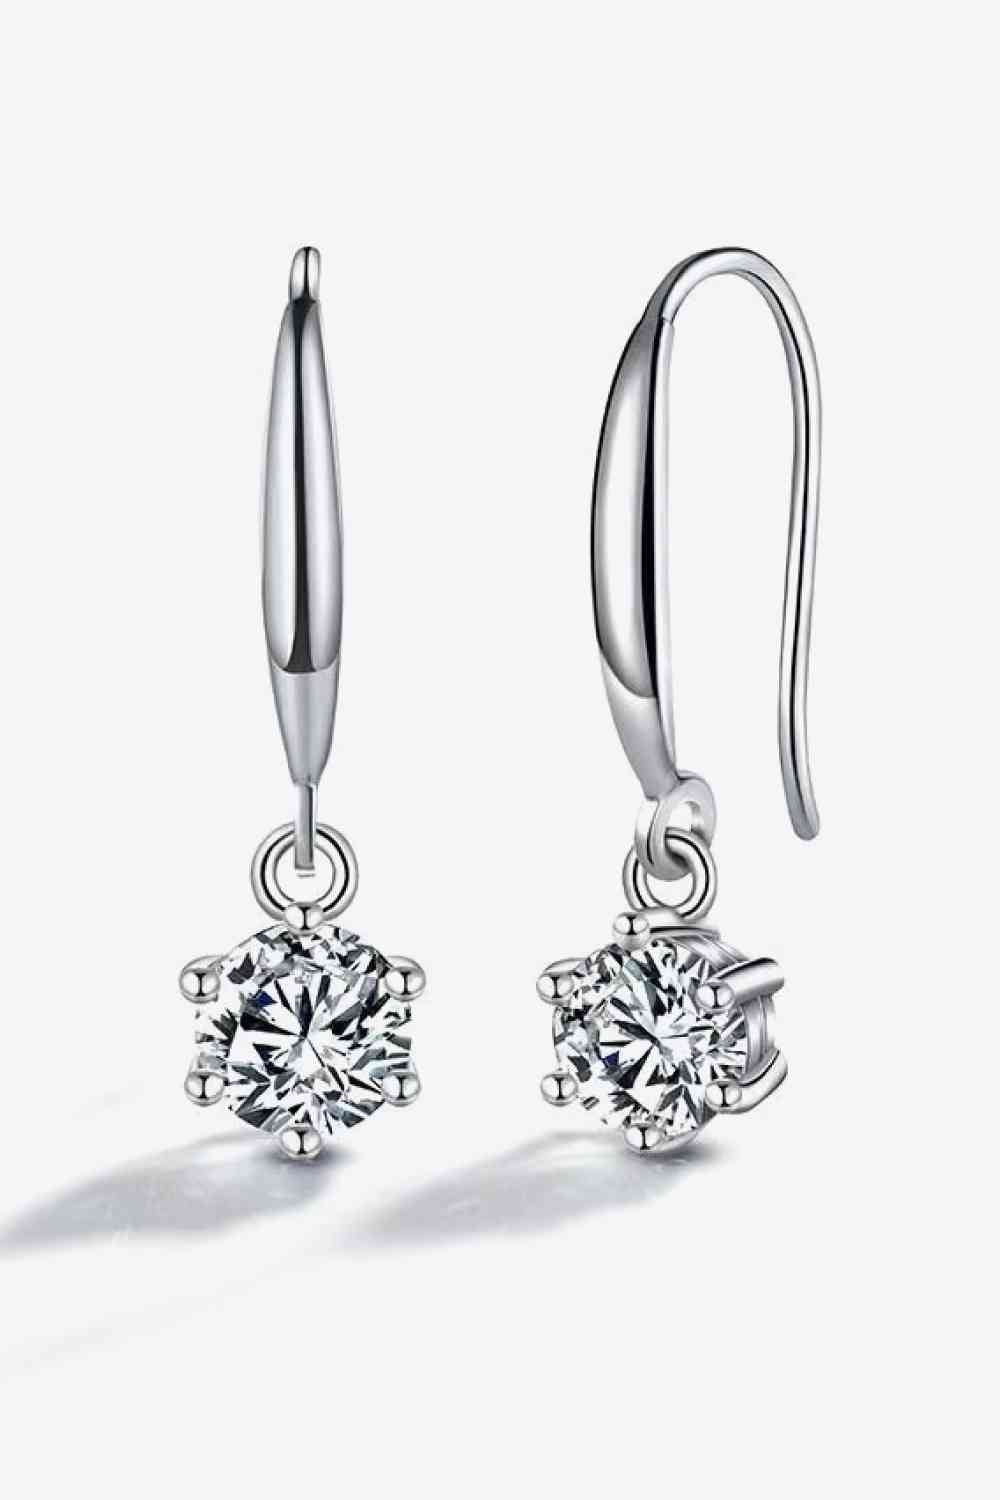 a pair of earrings with a diamond in the center